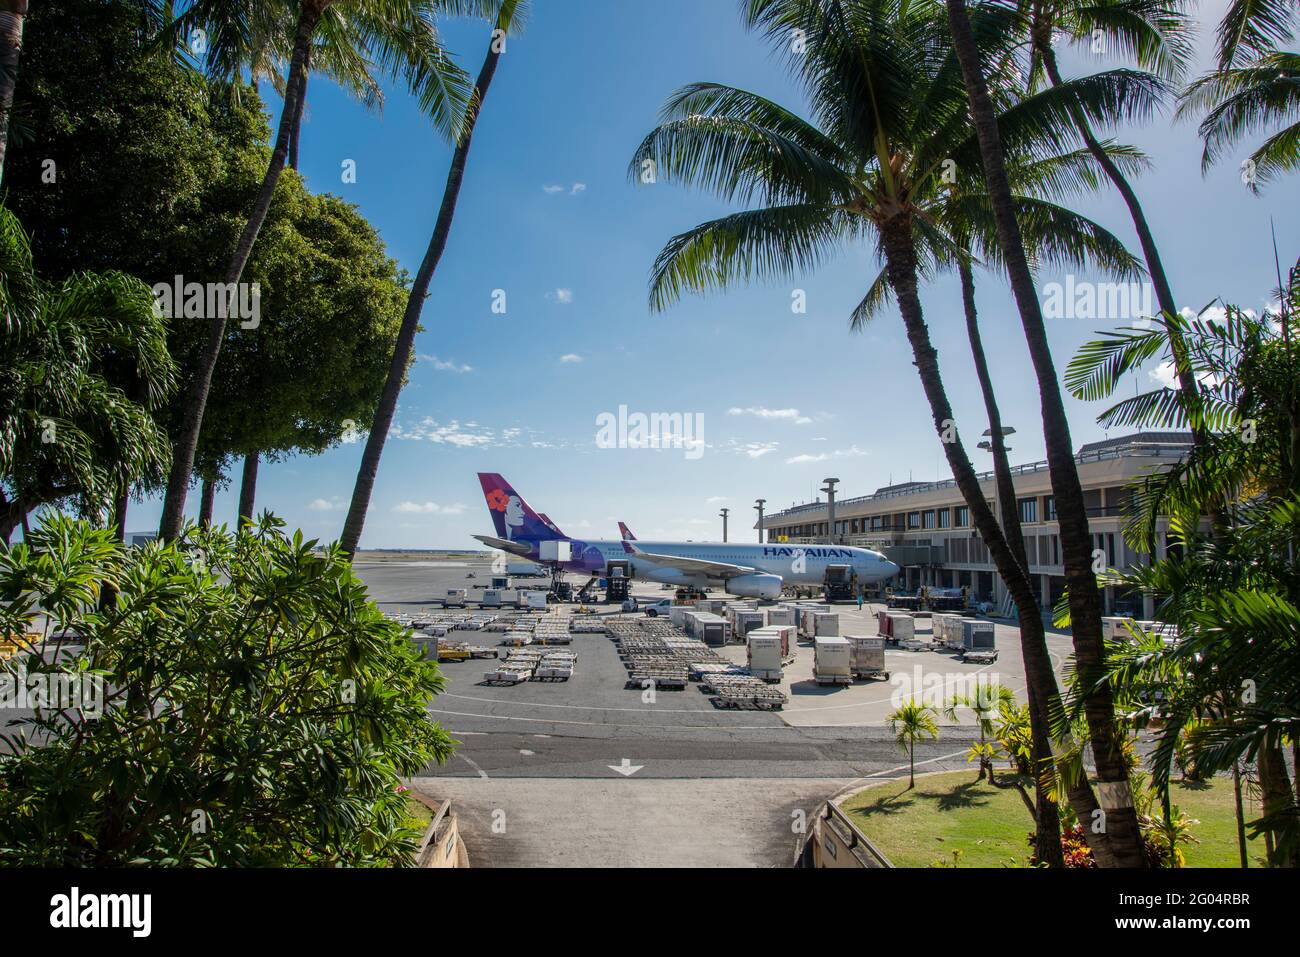 Honolulu, Hawaii. Hawaiian airlines airplane being fueled and loaded for the next flight at the Daniel K. Inouye International Airport. Stock Photo